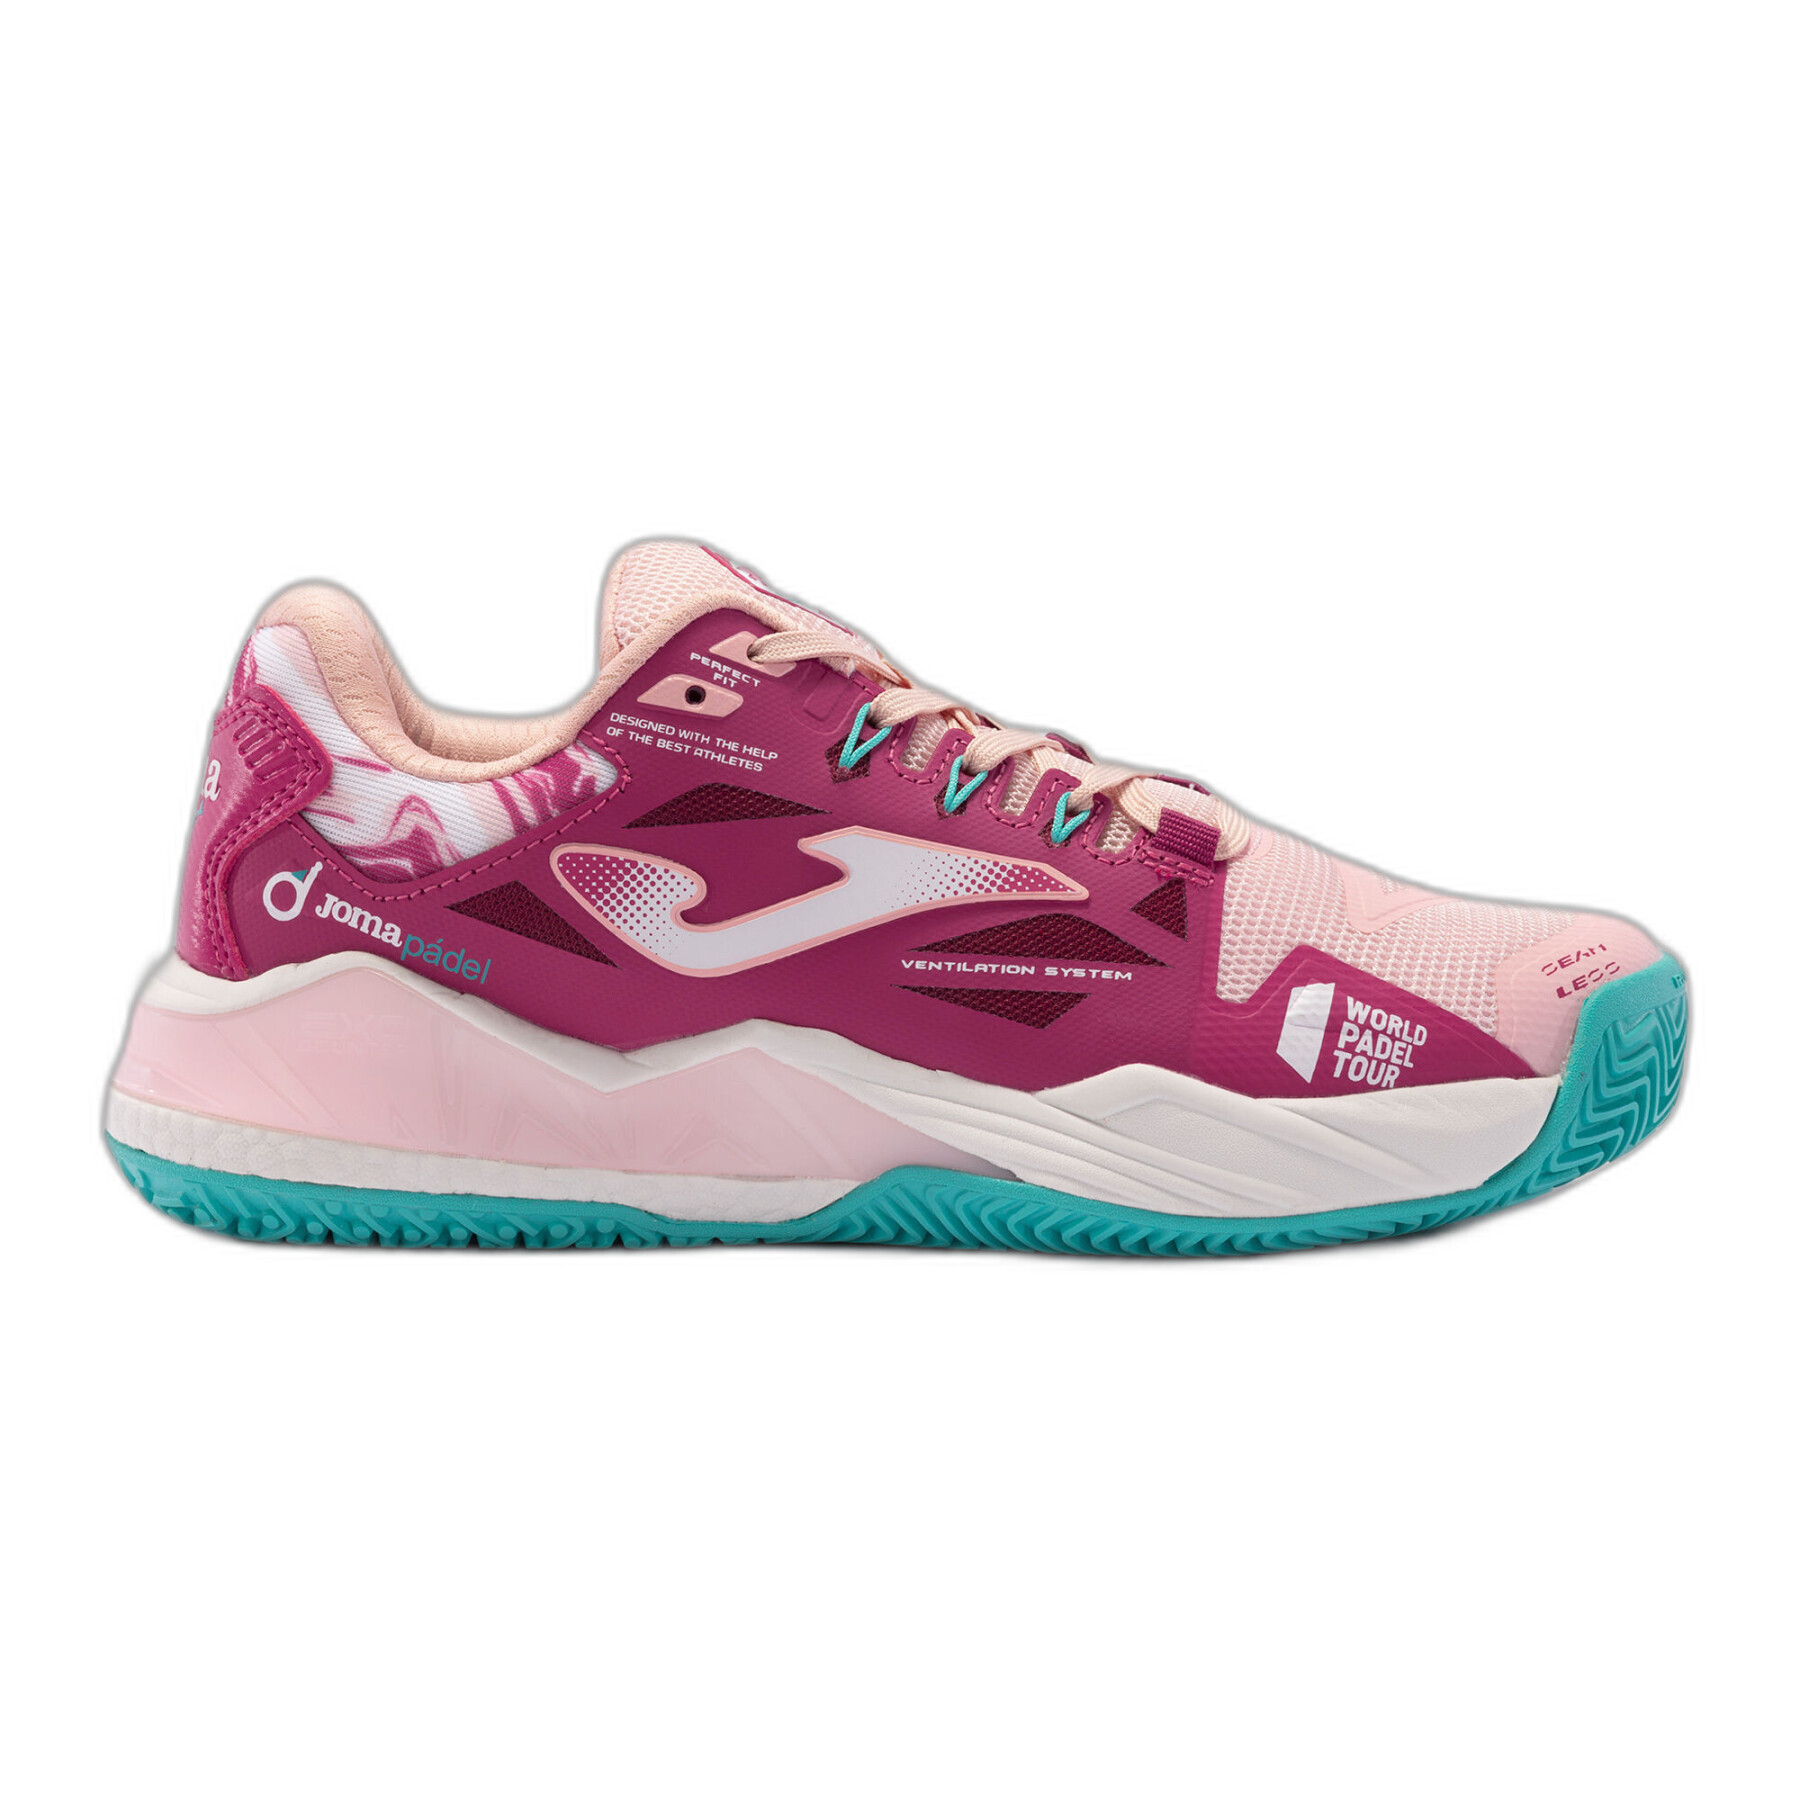 Chaussures de padel femme Joma T.Spin 2313